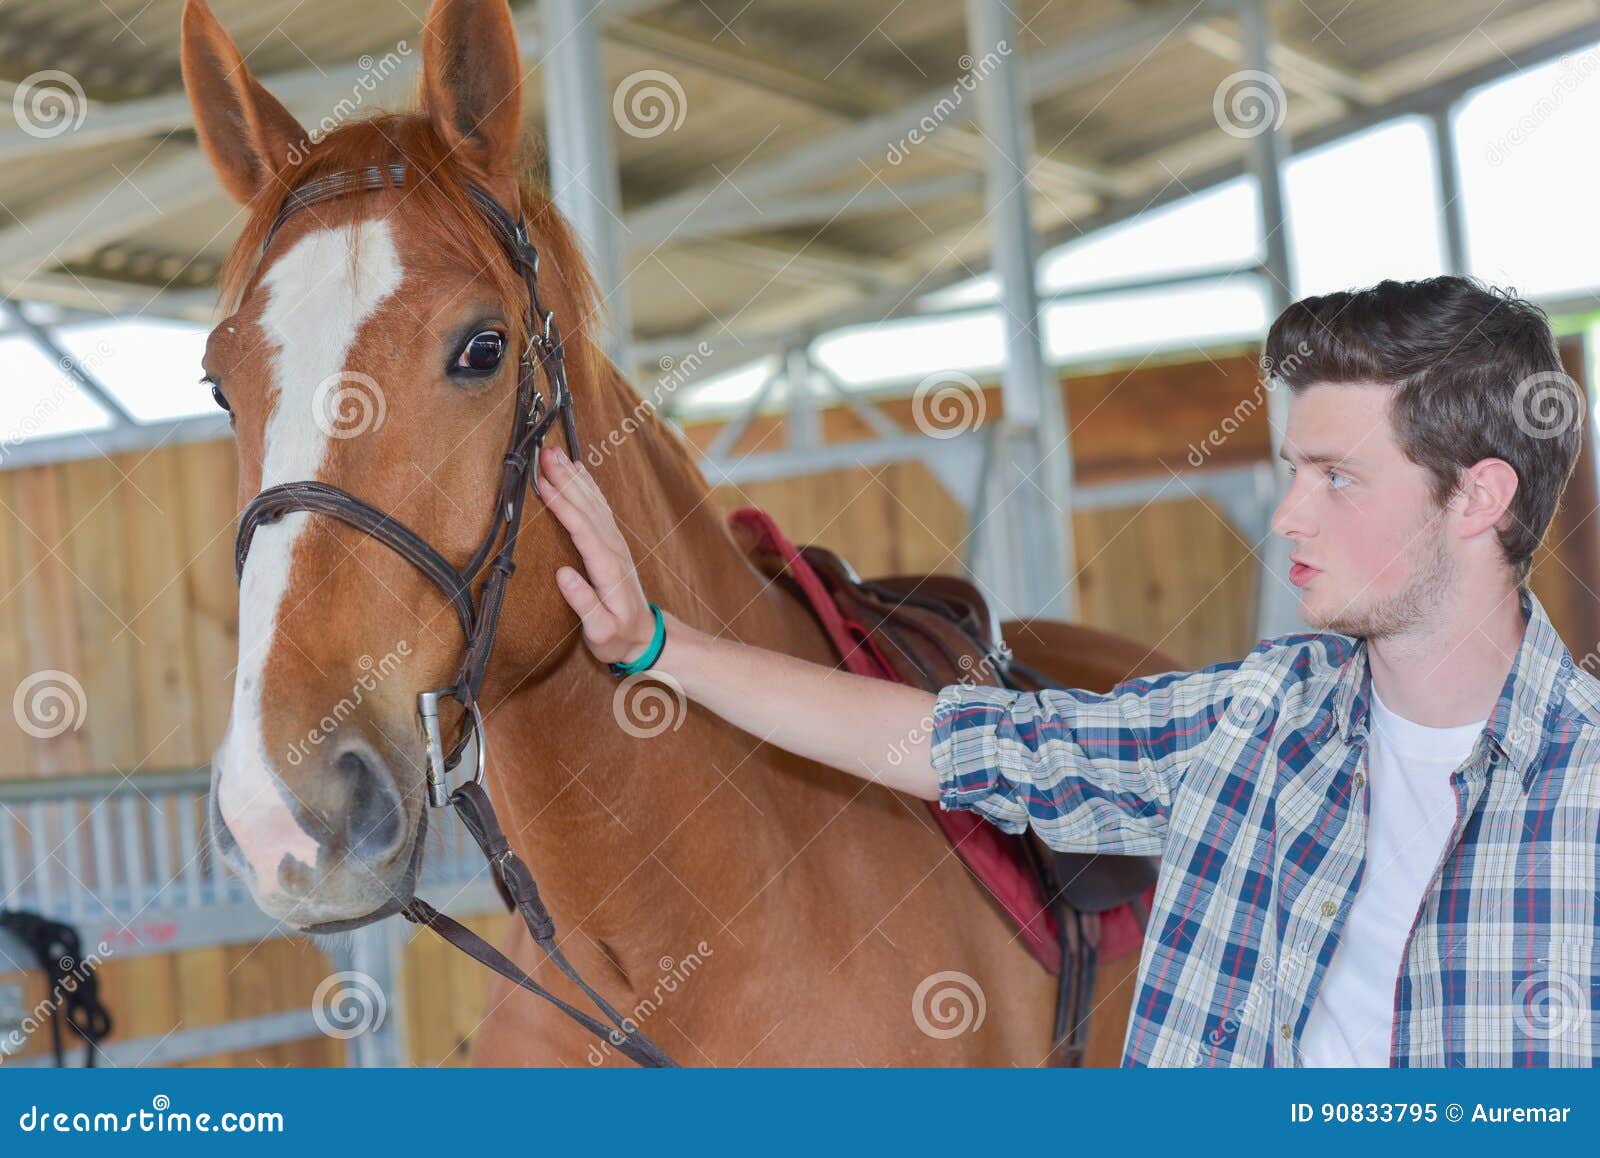 man calming horse with stroke